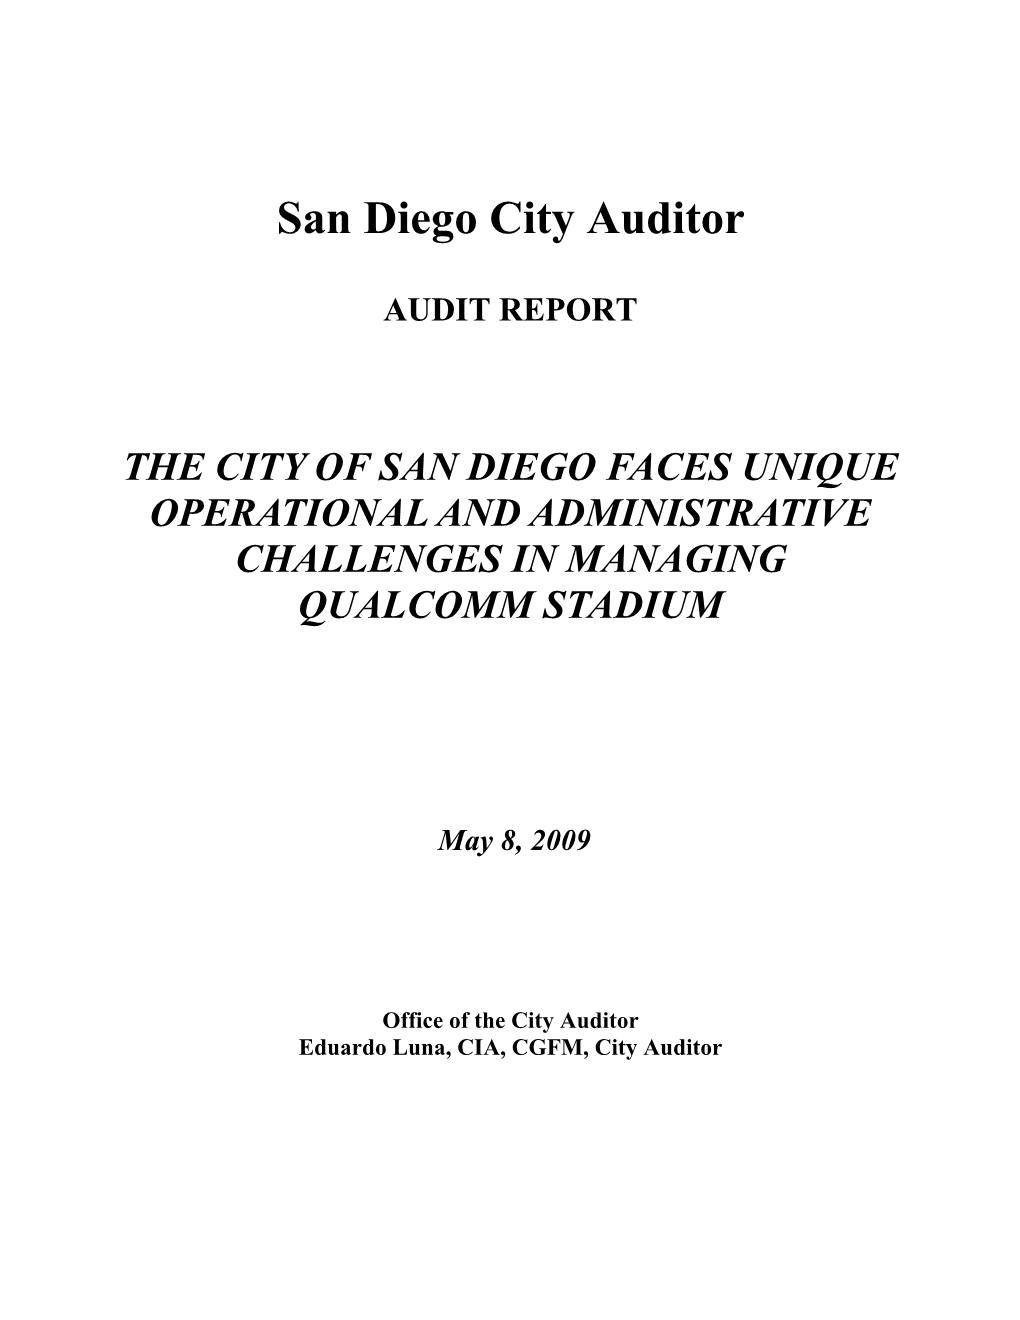 The City of San Diego Faces Unique Operational and Administrative Challenges in Managing Qualcomm Stadium